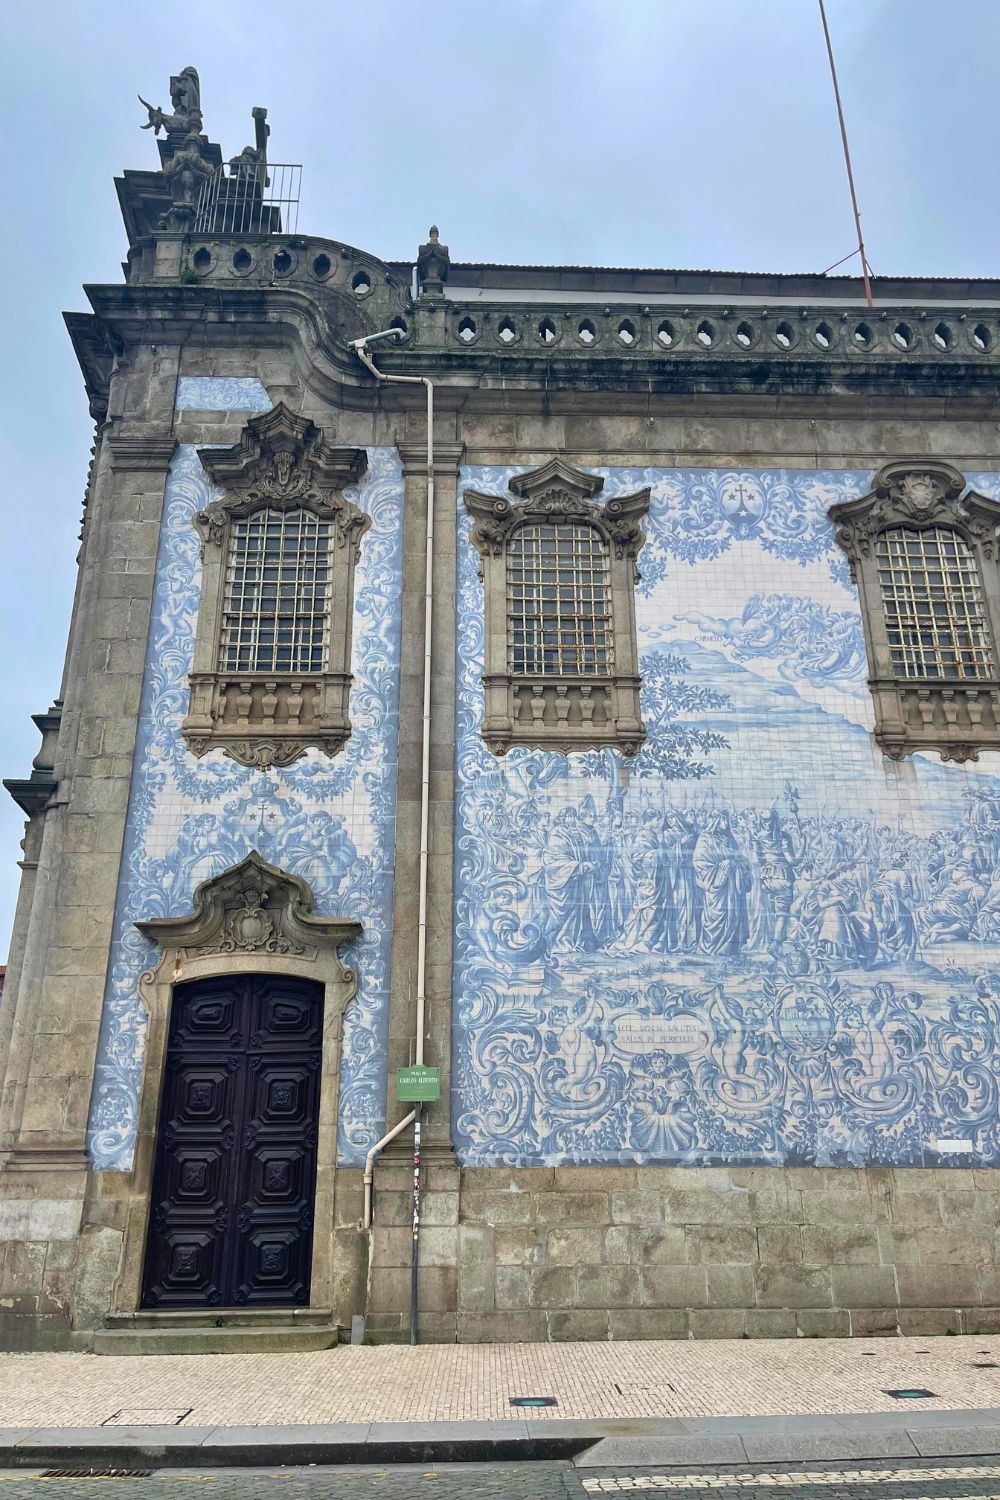 Facade of a church in Porto adorned with intricate azulejo tilework, showcasing scenes in various shades of blue under a cloudy sky.